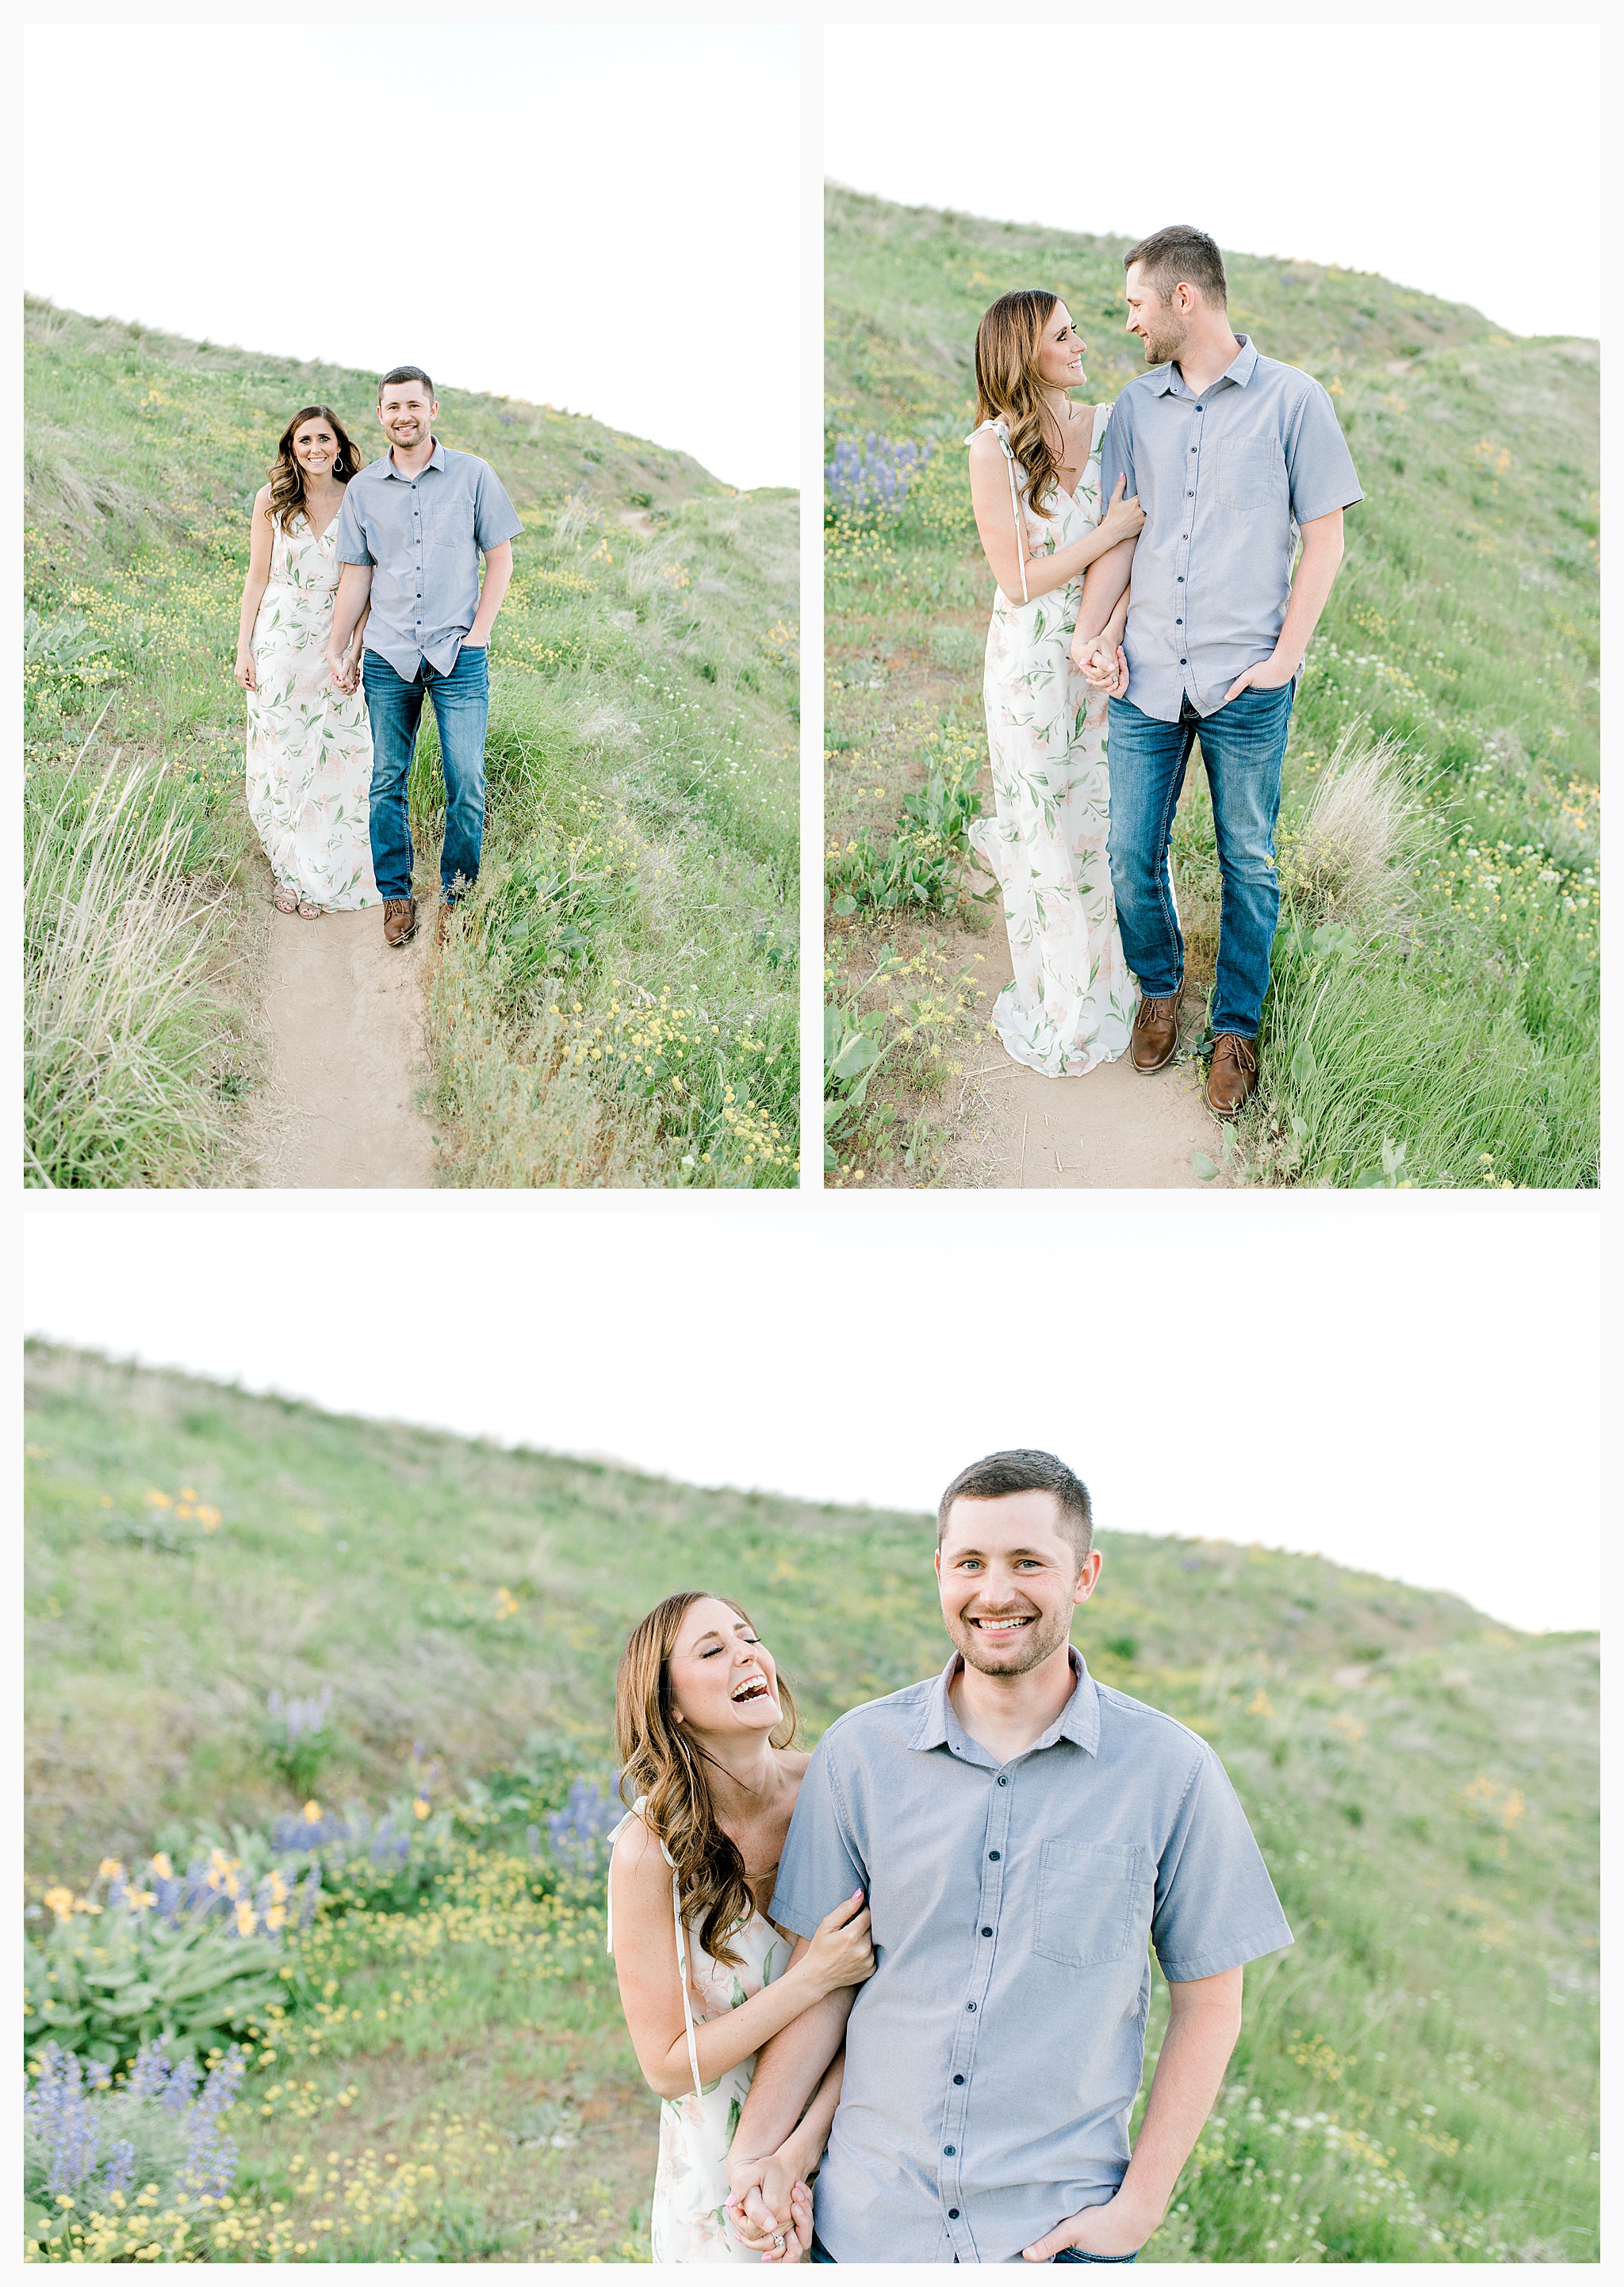 Engagement session amongst the wildflowers in Wenatchee, Washington | Engagement Session Outfit Inspiration for Wedding Photography with Emma Rose Company | Light and Airy PNW Photographer, Seattle Bride_0001.jpg